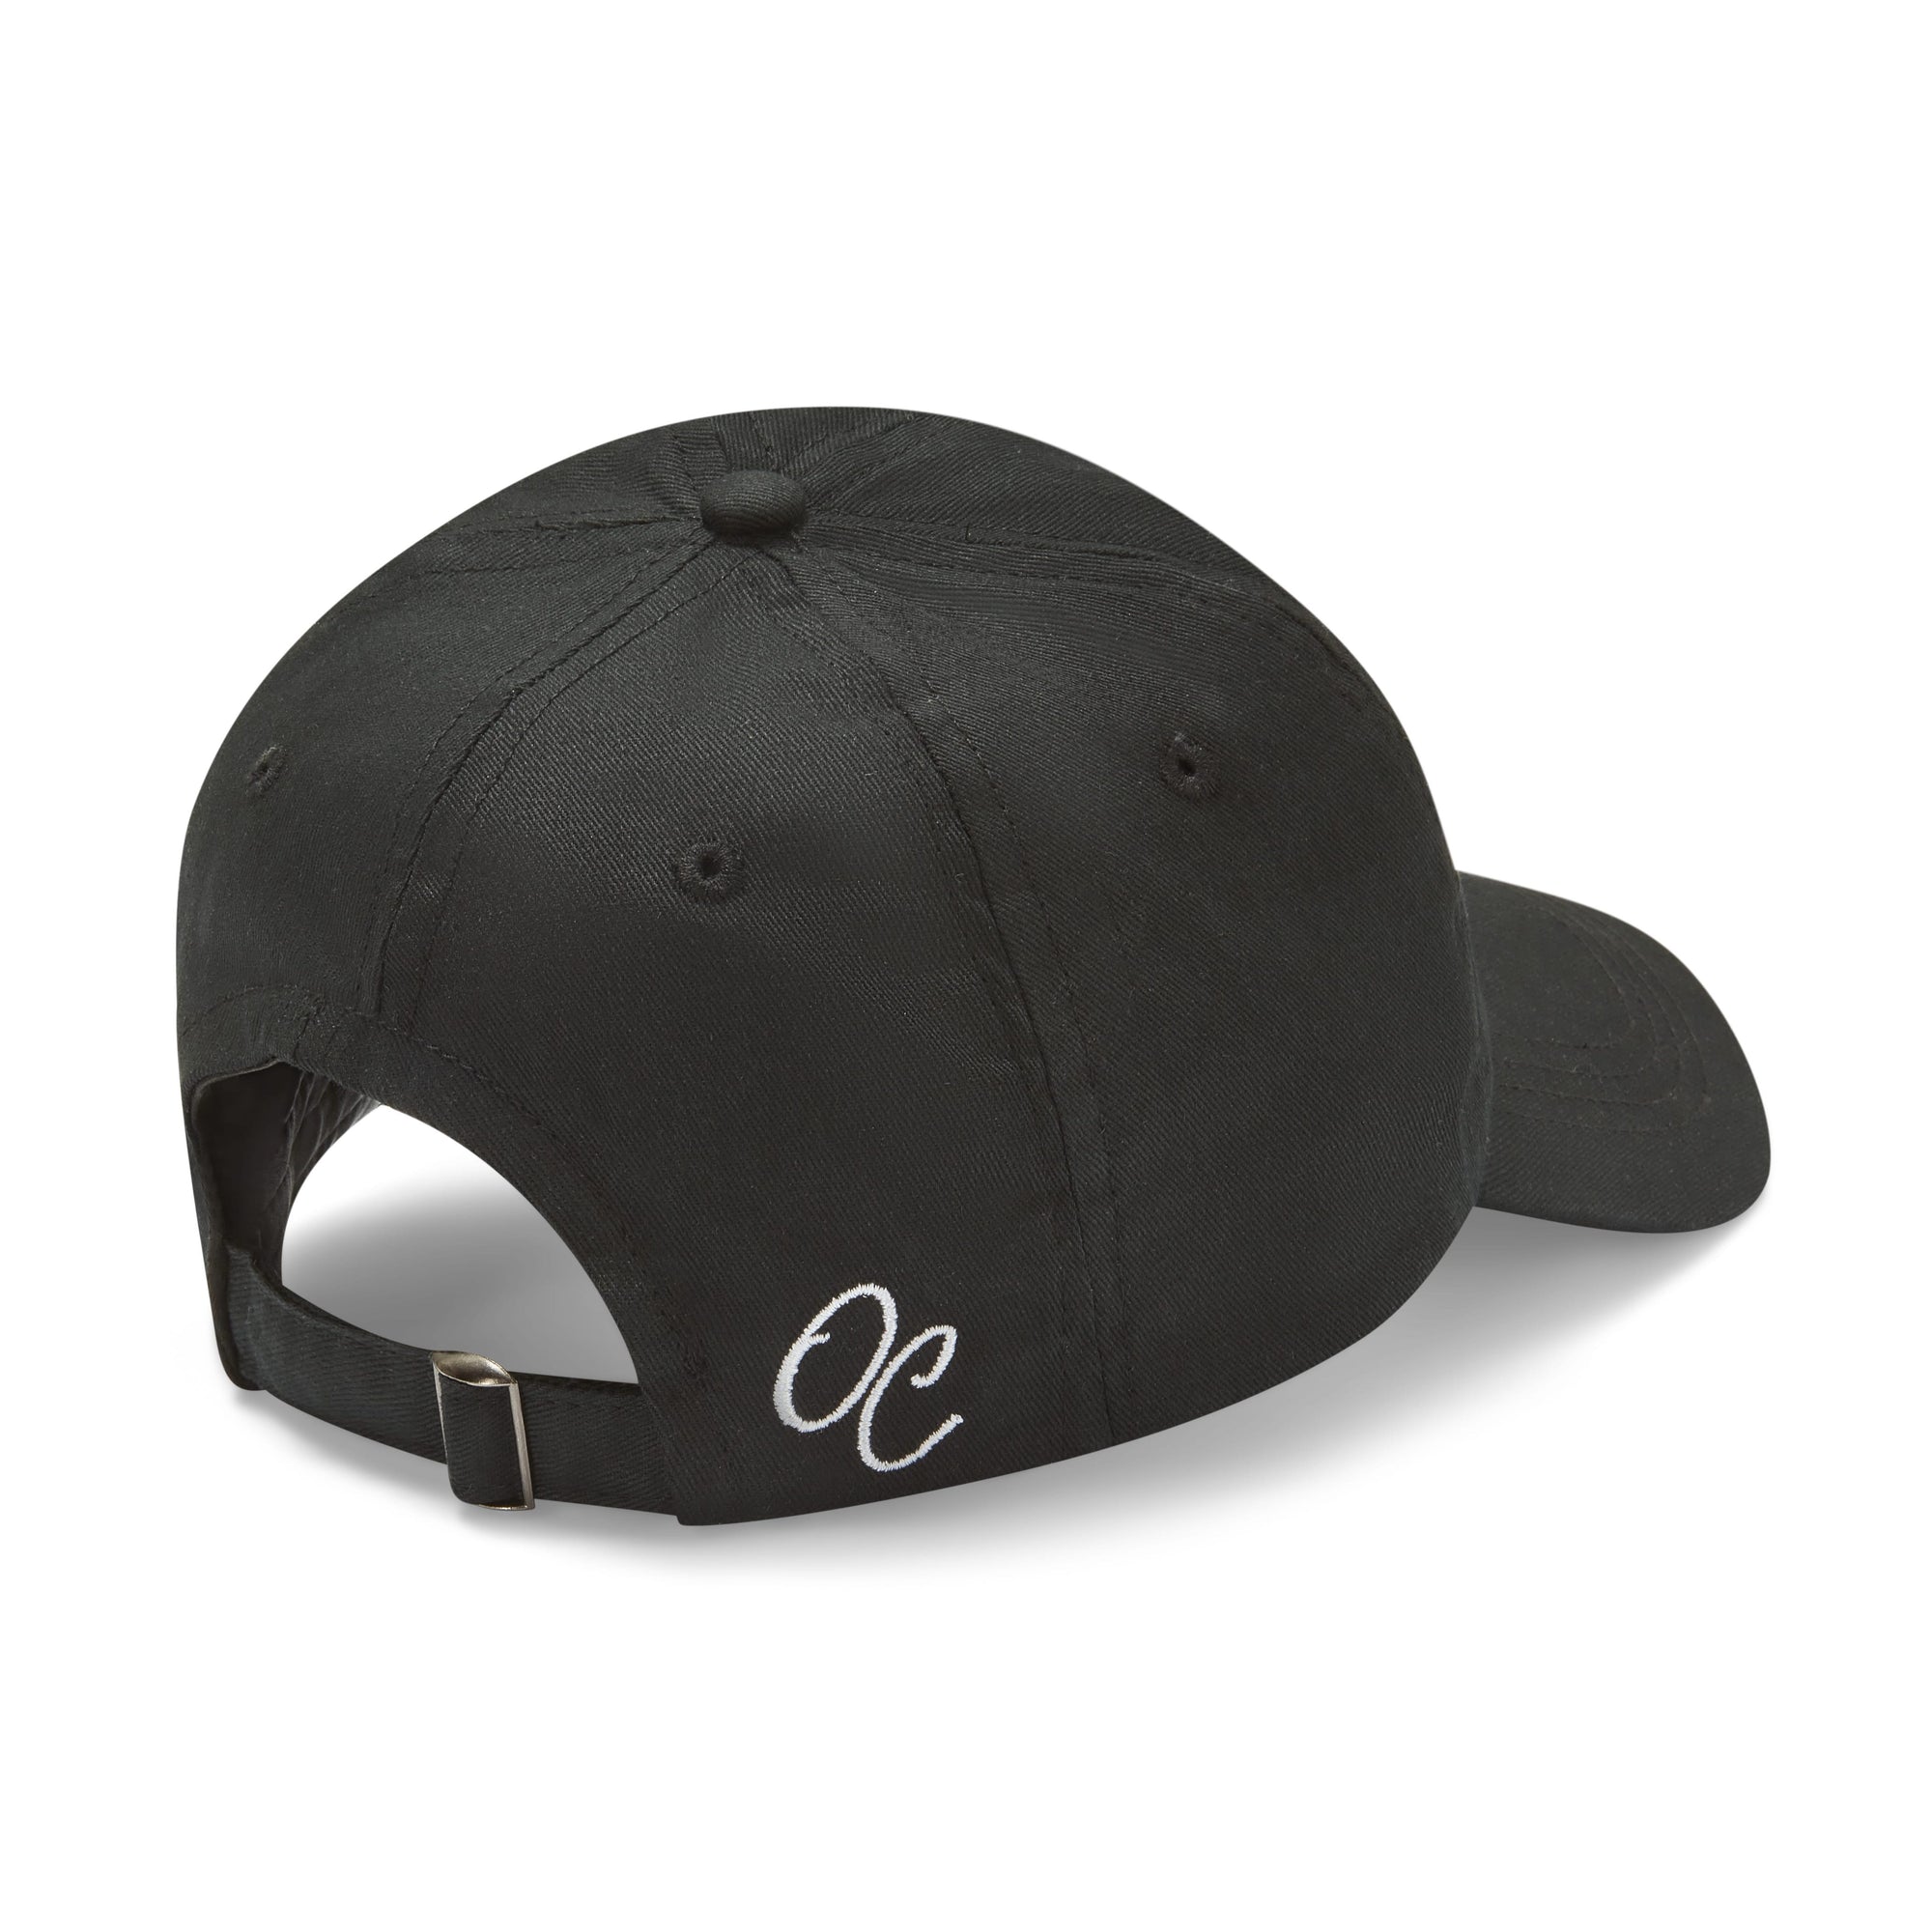 Only Curls Satin Lined Baseball Hat  - Black - Only Curls